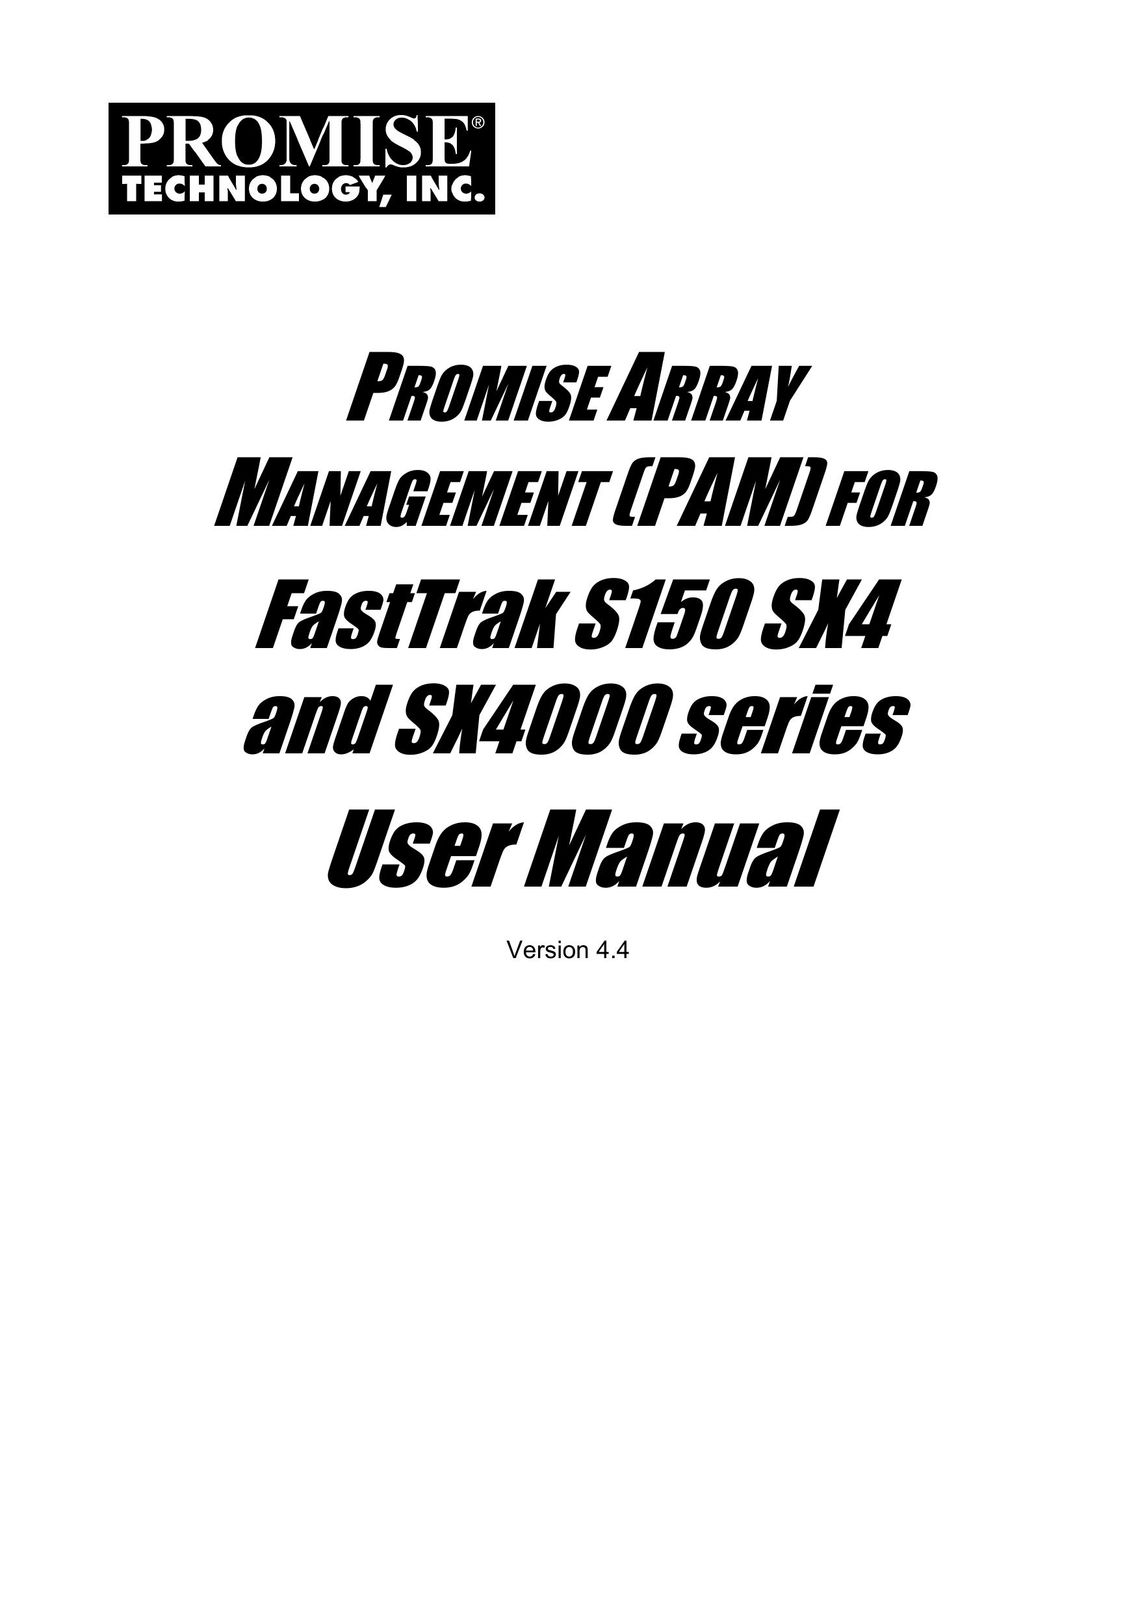 Promise Technology Version 4.4 Network Card User Manual